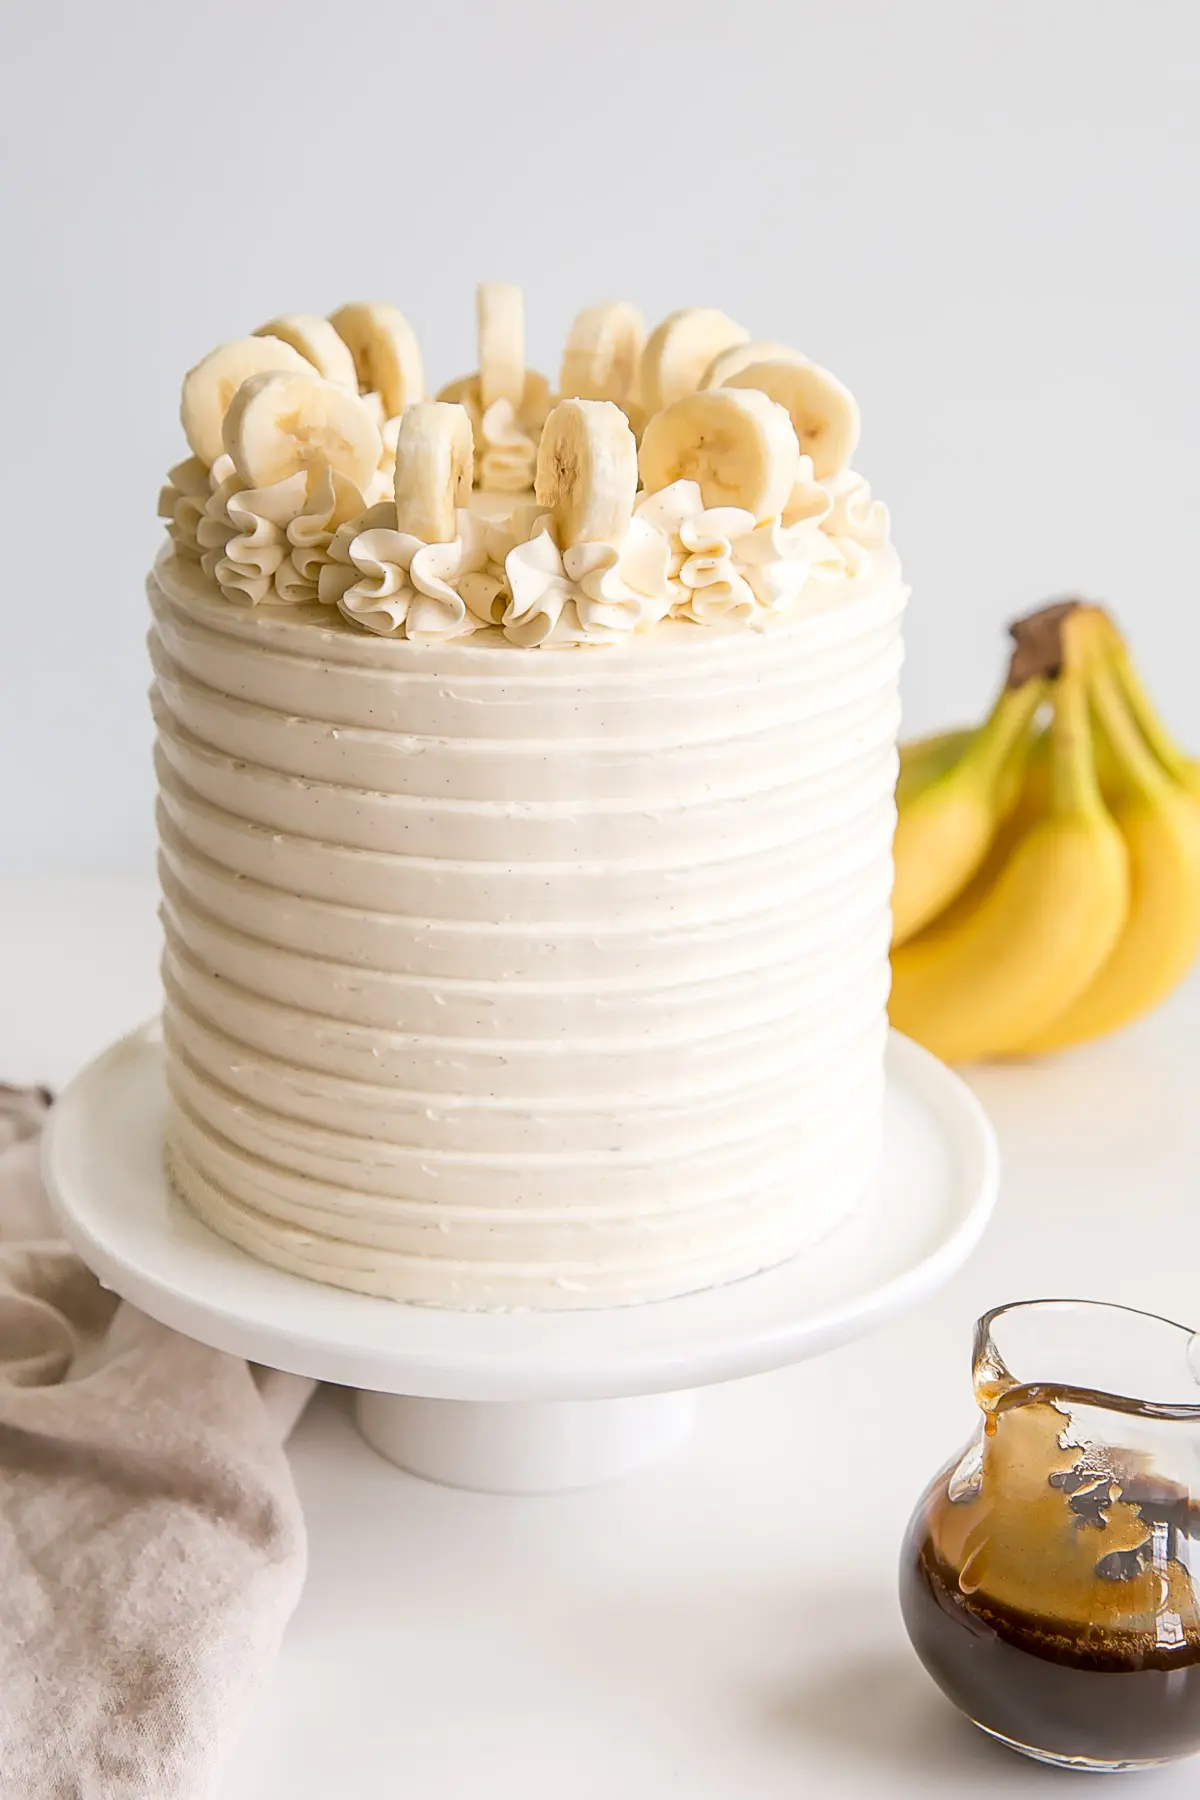 Bananas Foster cake with bananas in the background and fosters sauce in a small pitcher.